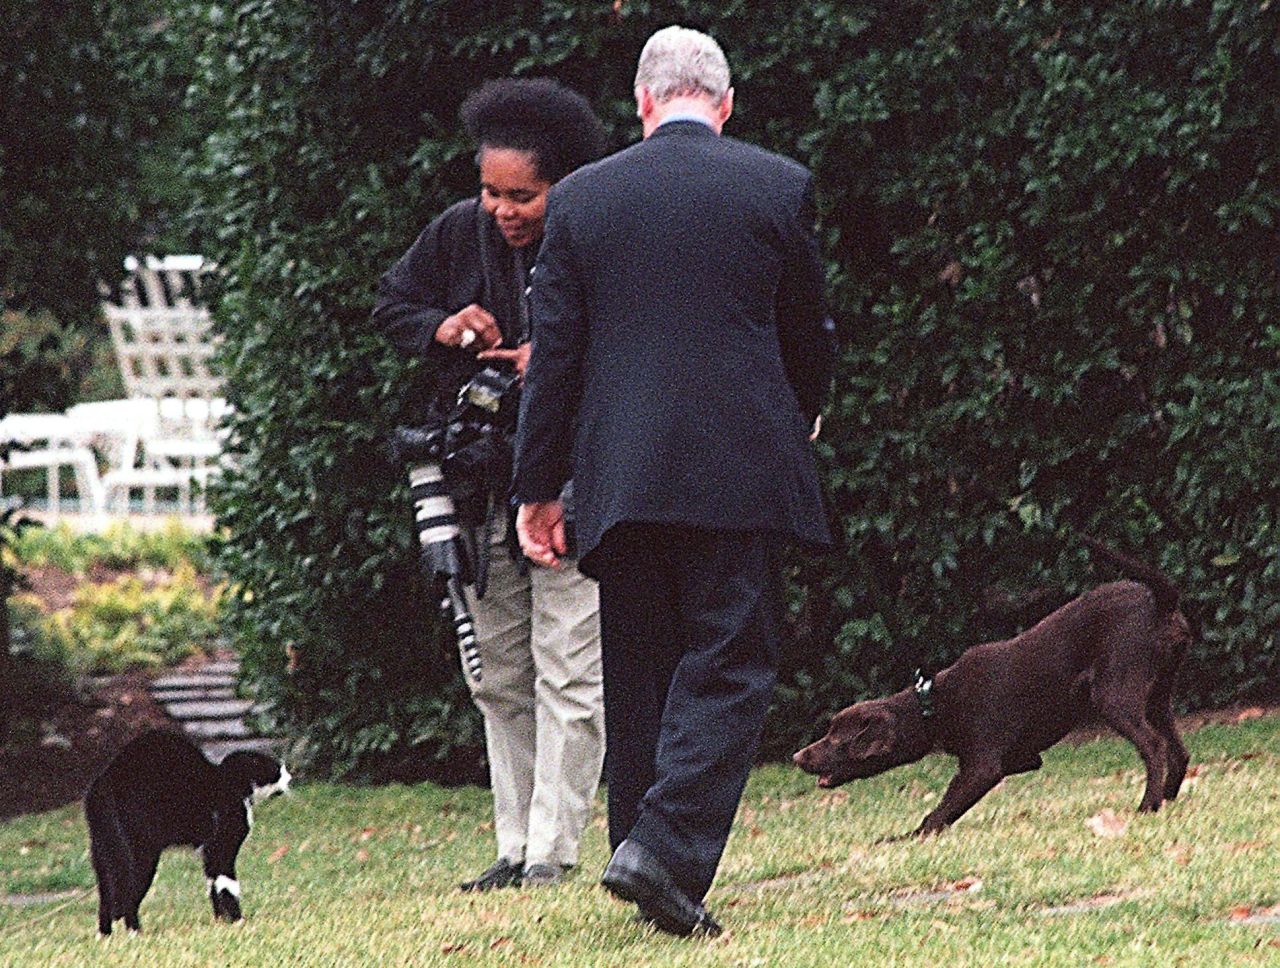 Sharon Farmer was the first African-American to be hired as the chief official White House photographer — a position that only 11 people have held since it was created in 1961. Farmer covered President Bill Clinton, who is seen here with his dog Buddy and his cat Socks. Farmer started working in the Clinton White House in 1993, and she was promoted to chief official White House photographer in 1998.